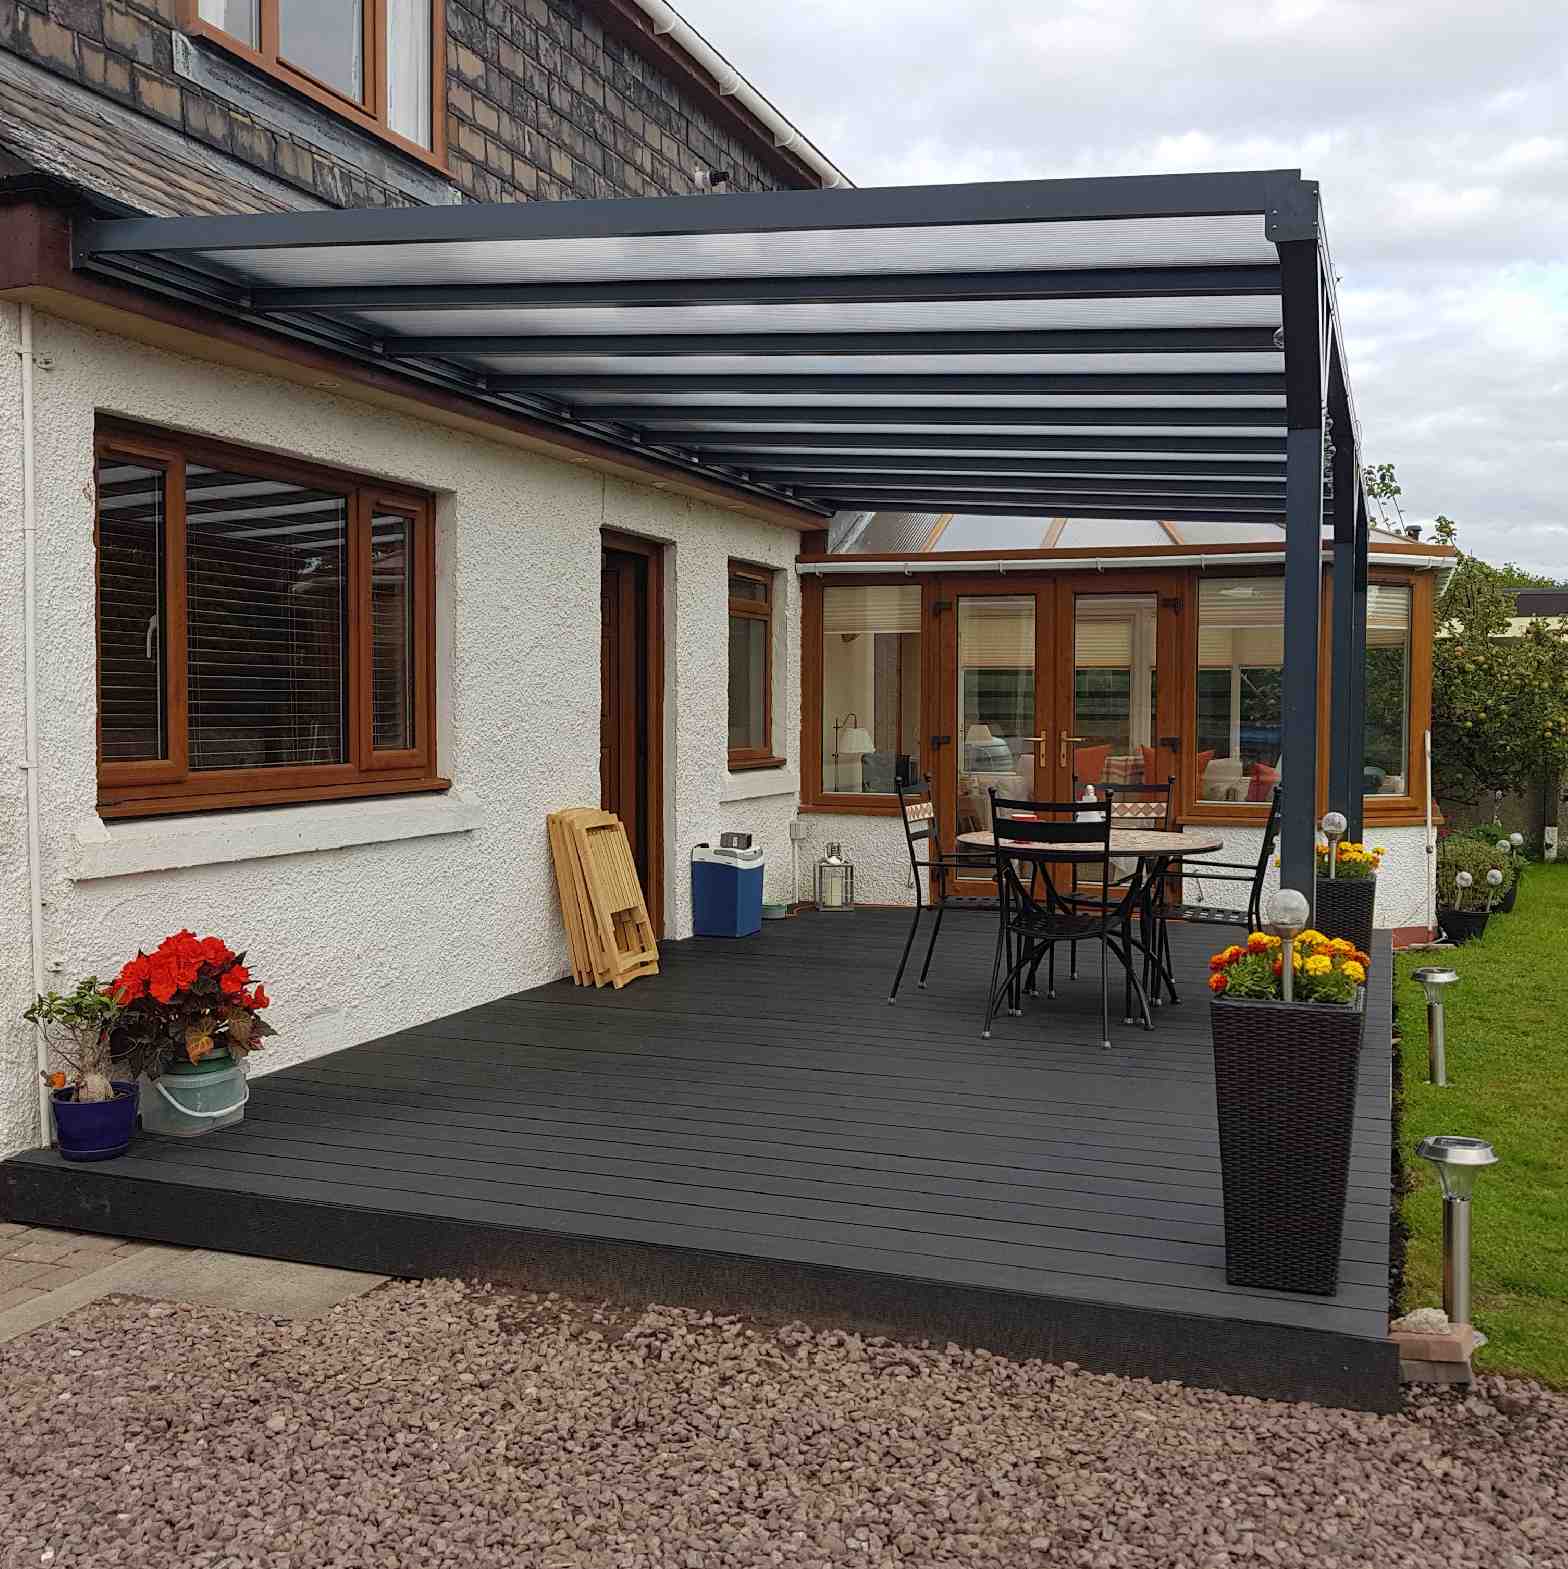 Buy Omega Verandah, Anthracite Grey, 16mm Polycarbonate Glazing - 9.5m (W) x 3.0m (P), (5) Supporting Posts online today